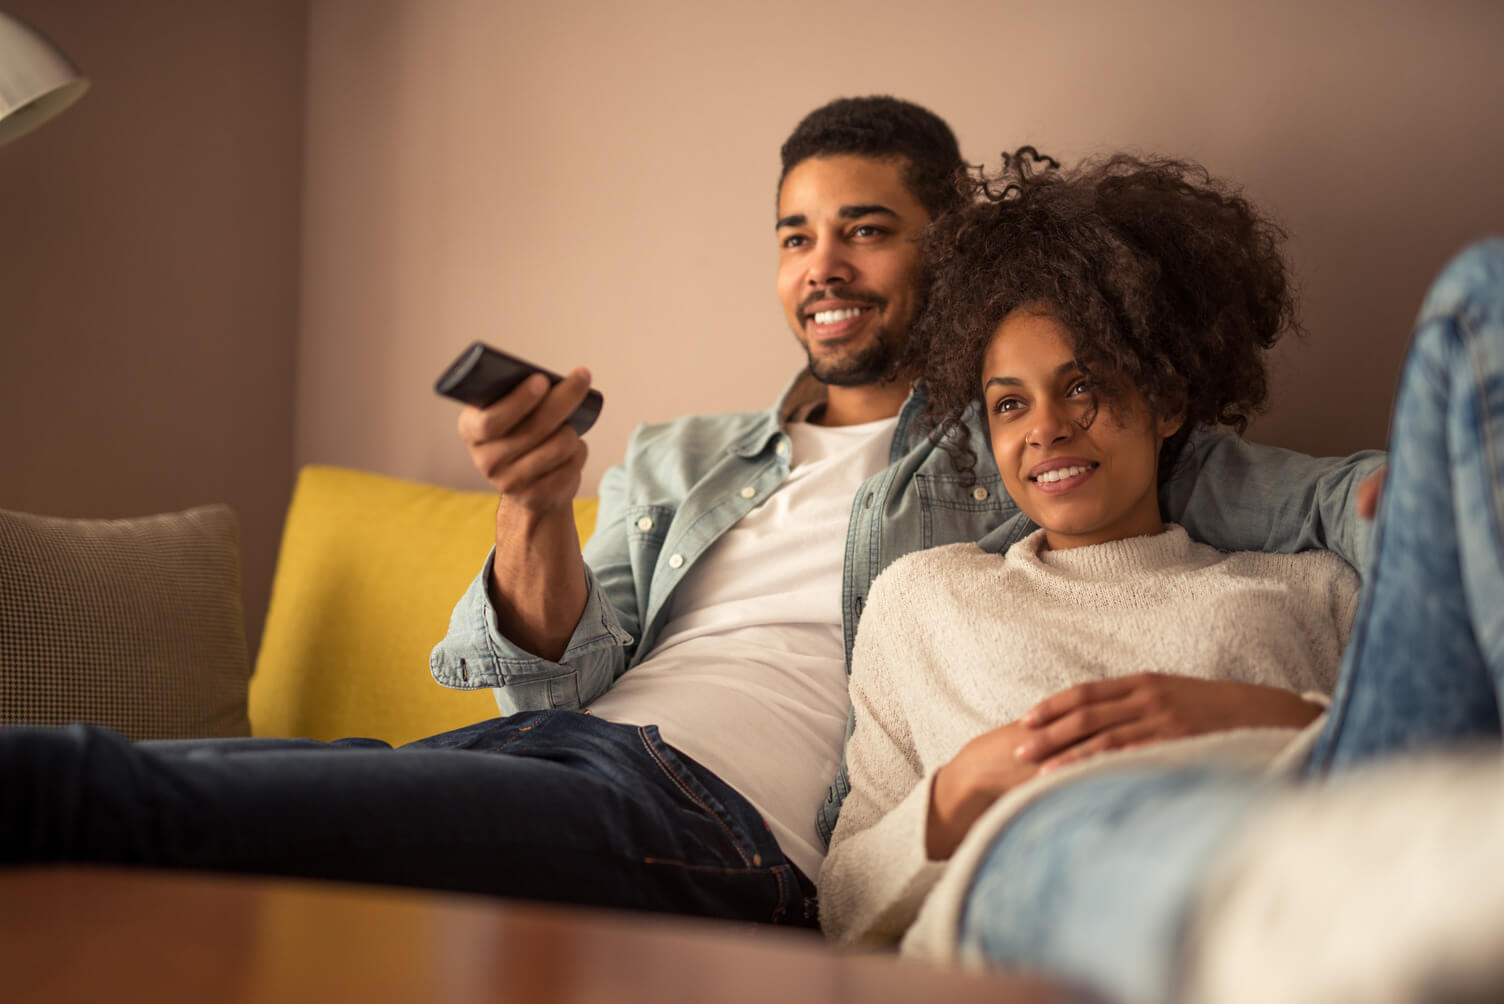 Connect your phone, utility and streaming service accounts to your Experian credit report and get credit for your payment history for free